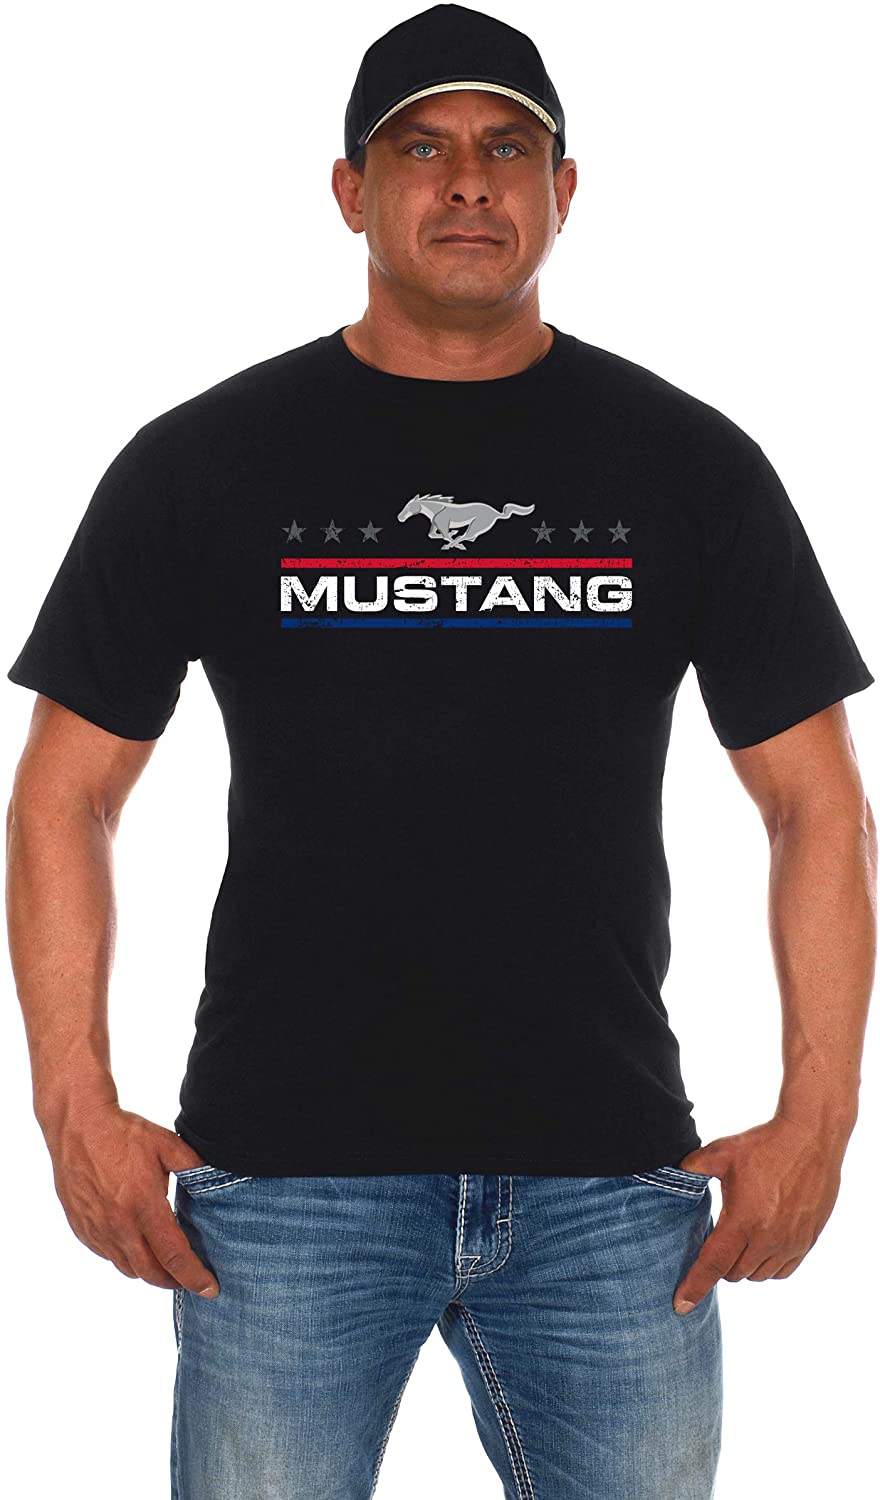 Ford Mustang Shirts And Hats - KibrisPDR